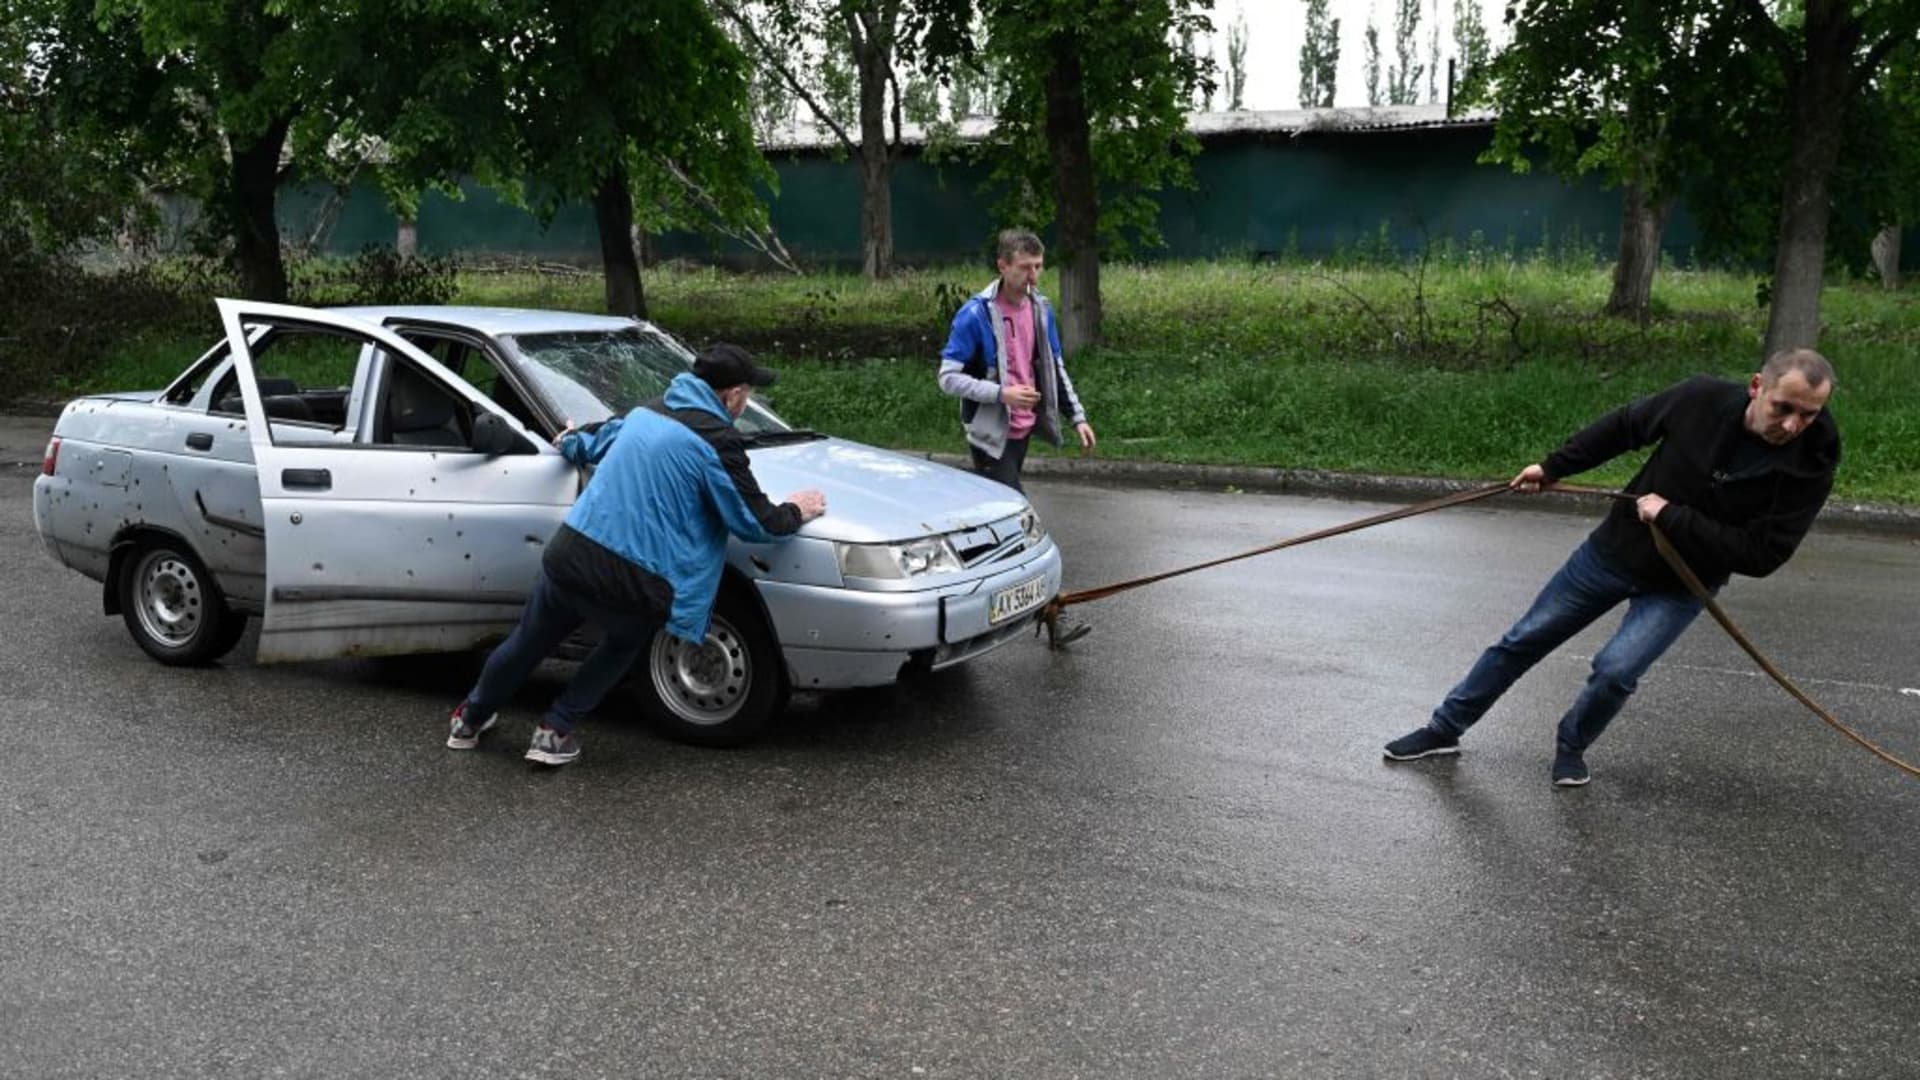 Local residents try to tow a damaged car in the Saltivka district, northern Kharkiv on May 29, 2022, amid Russian invasion of Ukraine.